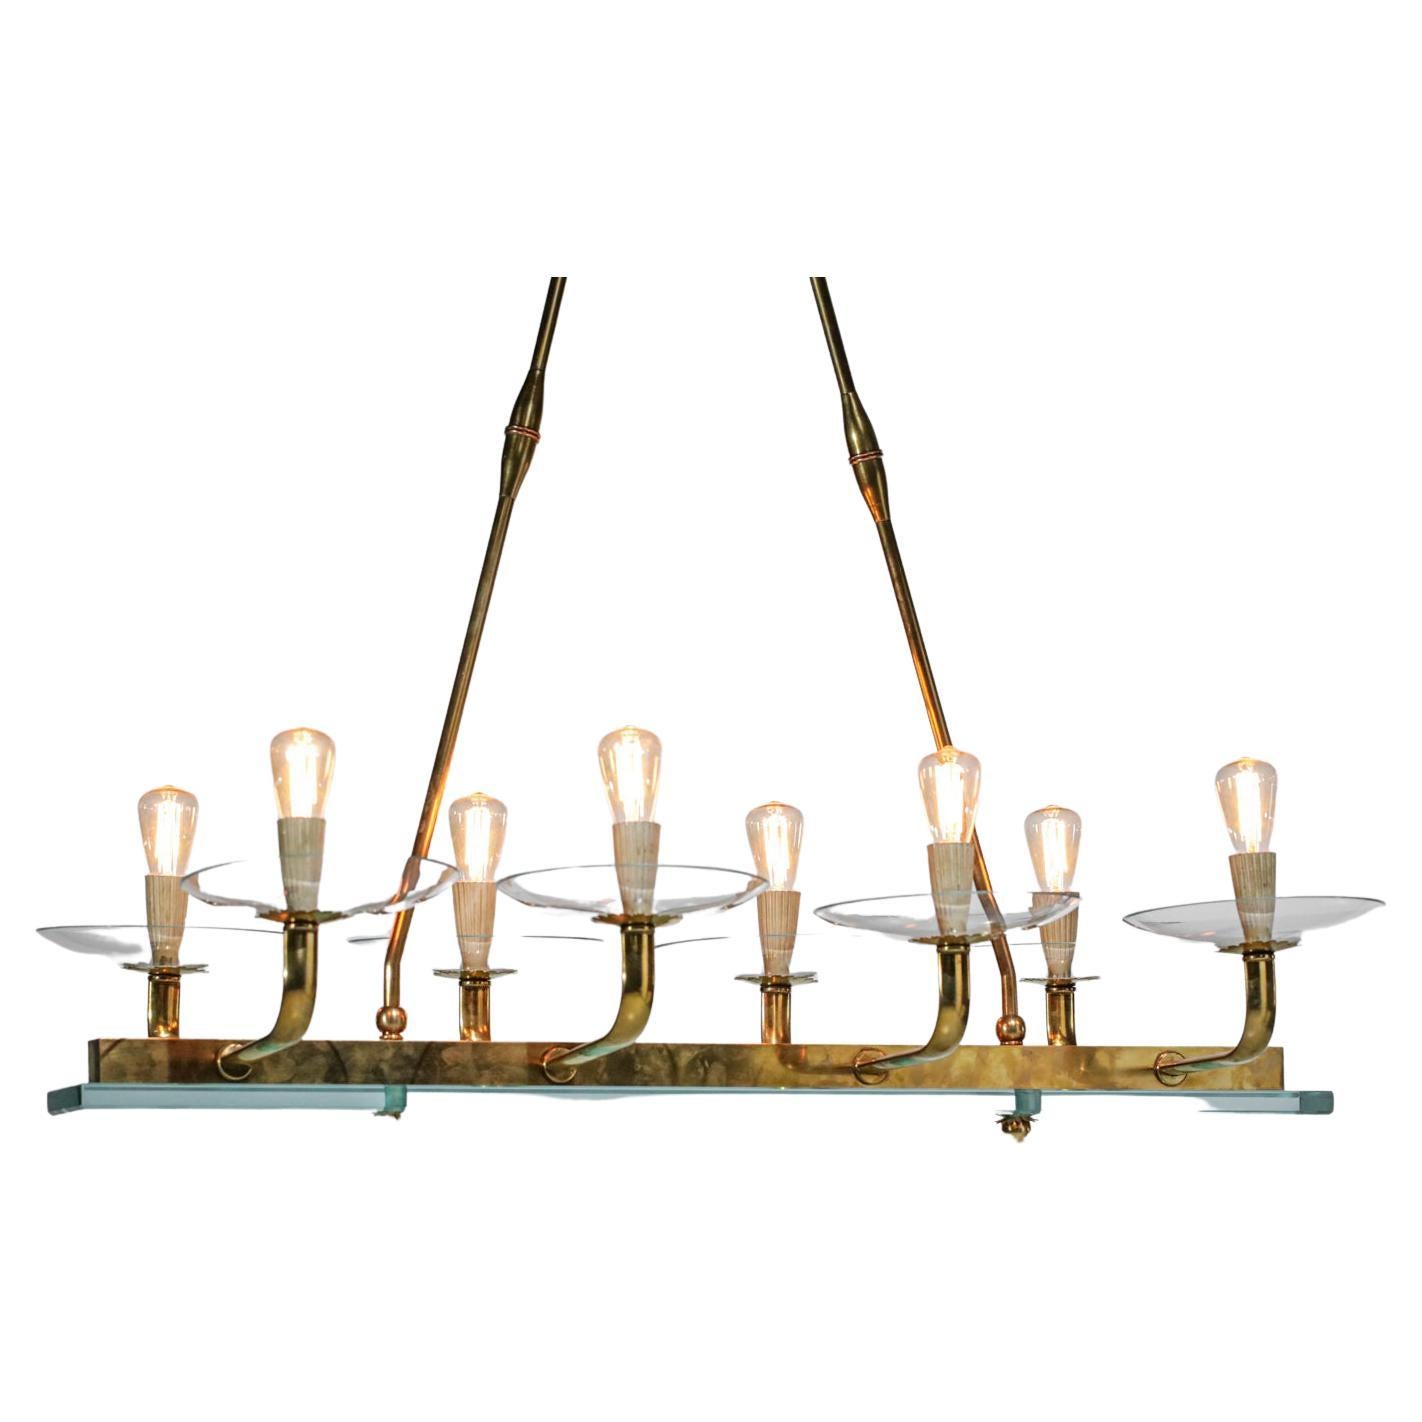 Italian chandelier from the 60's in the style of the work of. Solid brass structure, glass crossbar and cups, lacquered metal socket covers (original paint). Note the nice details of the work on the glass bar fasteners and the end of the brass